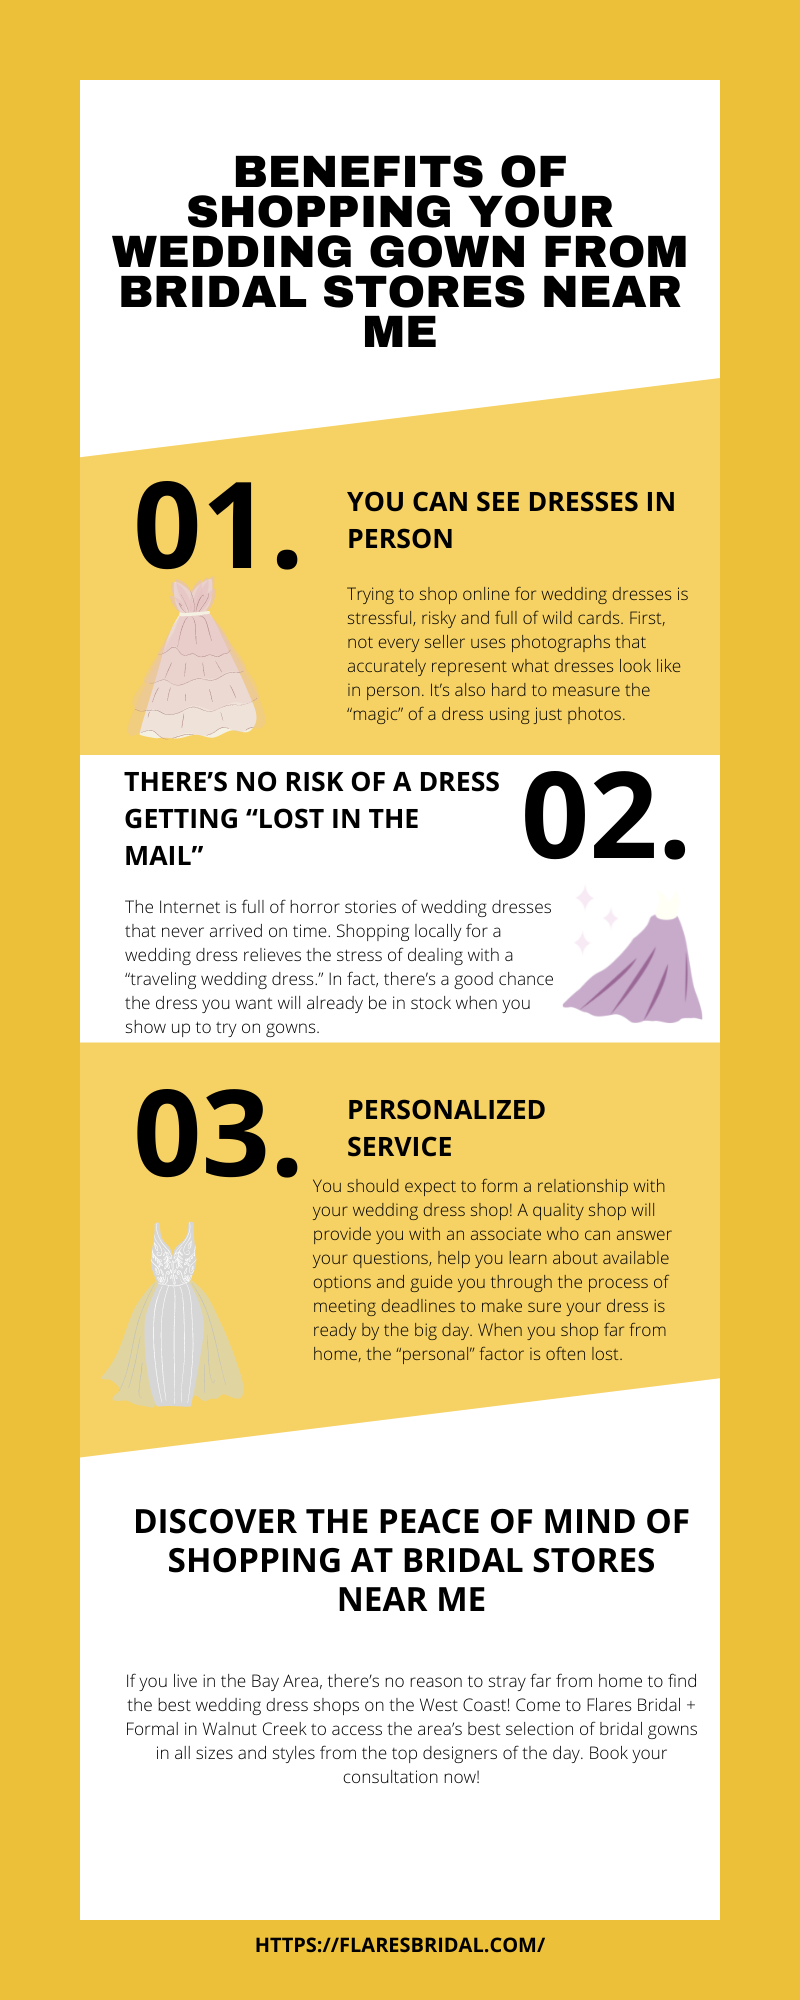 Benefits of shopping your wedding gown from bridal stores near me (1).png  by flaresbridal